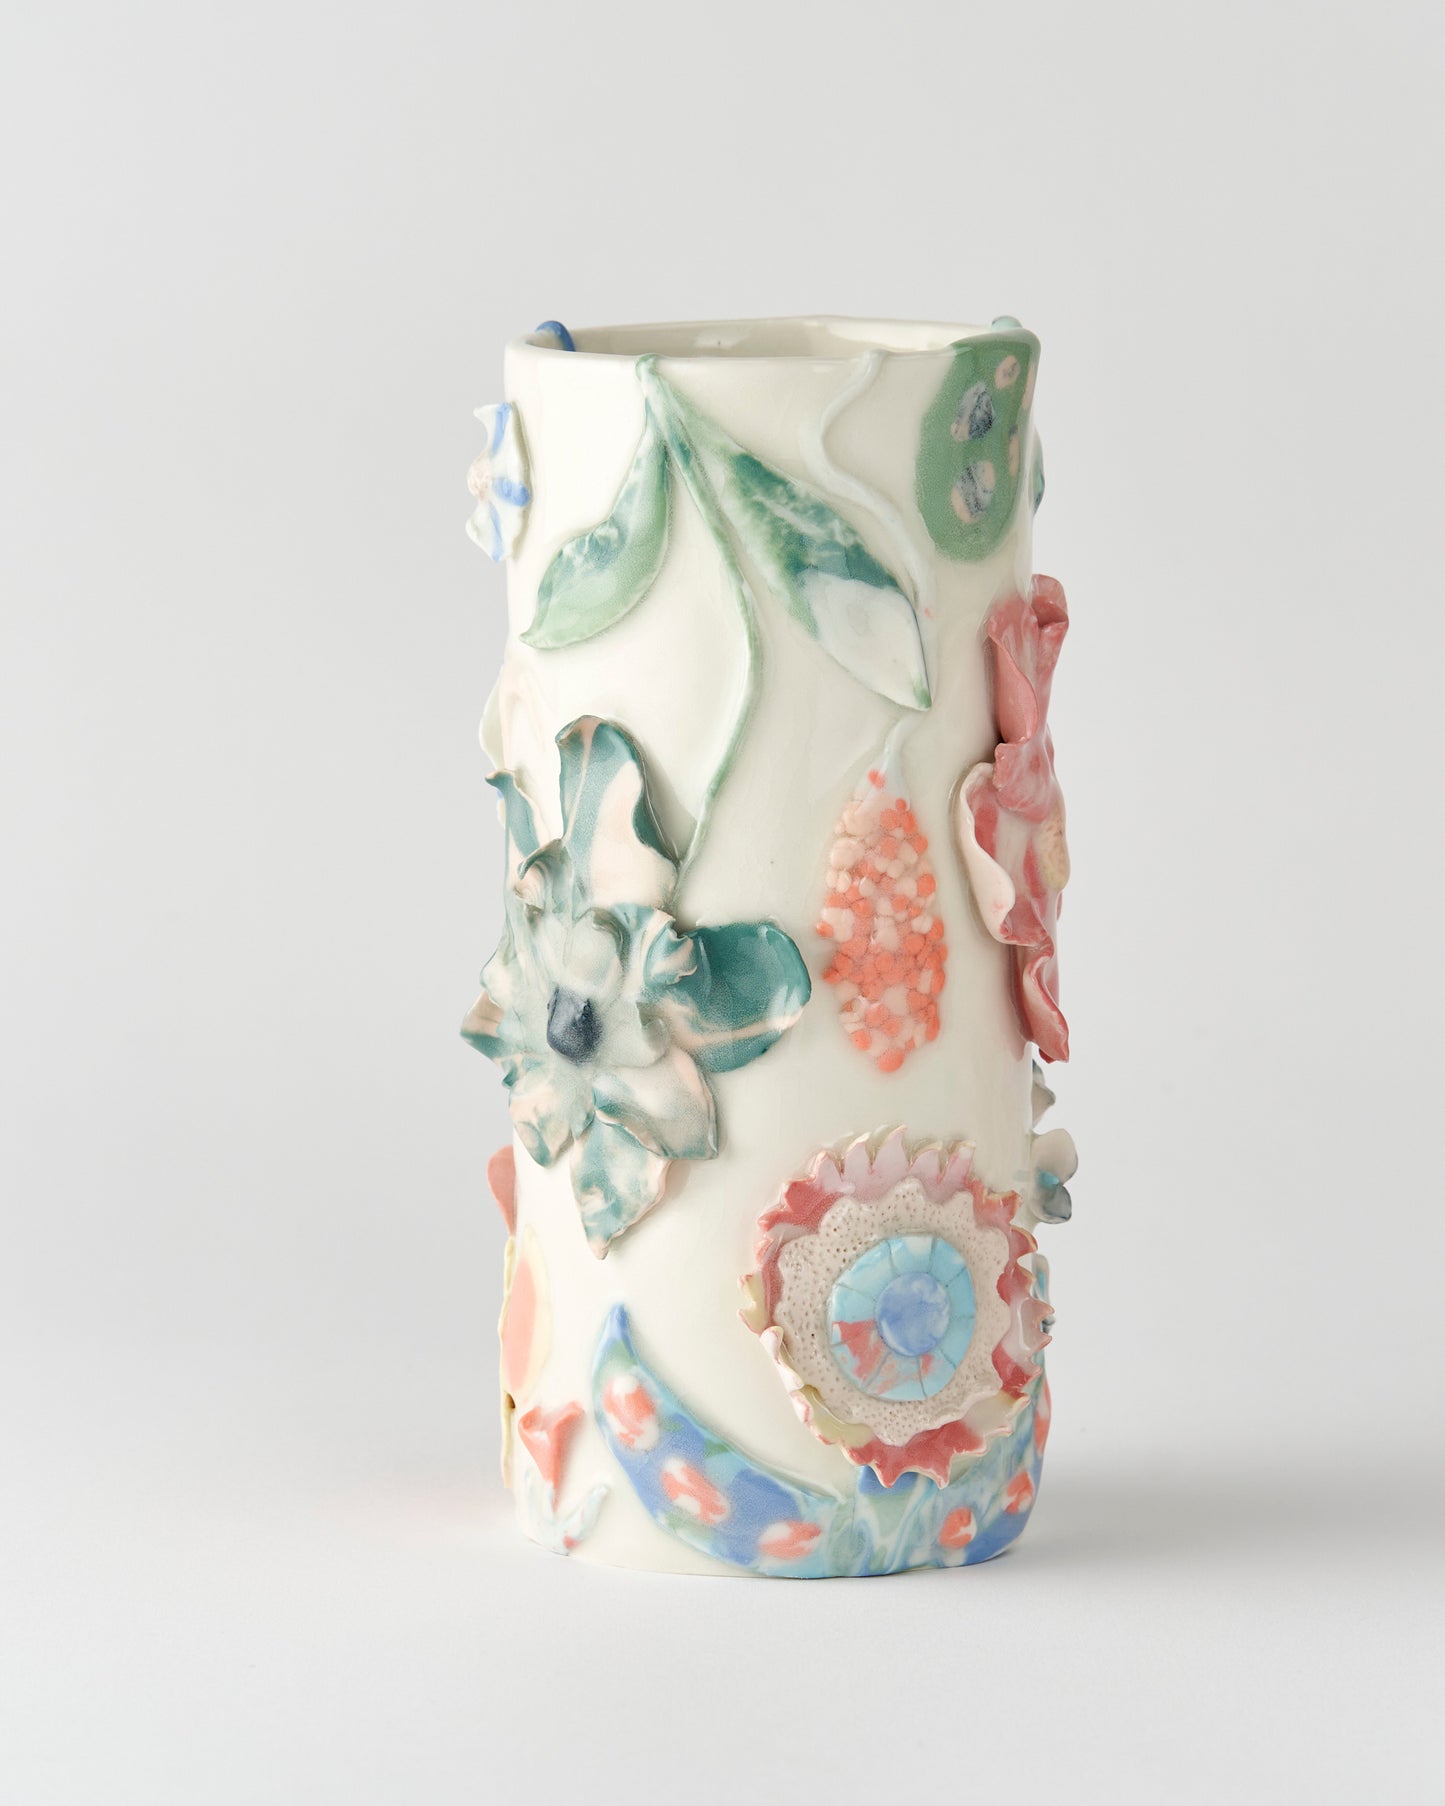 Marie Priour / Forget me not / Vase